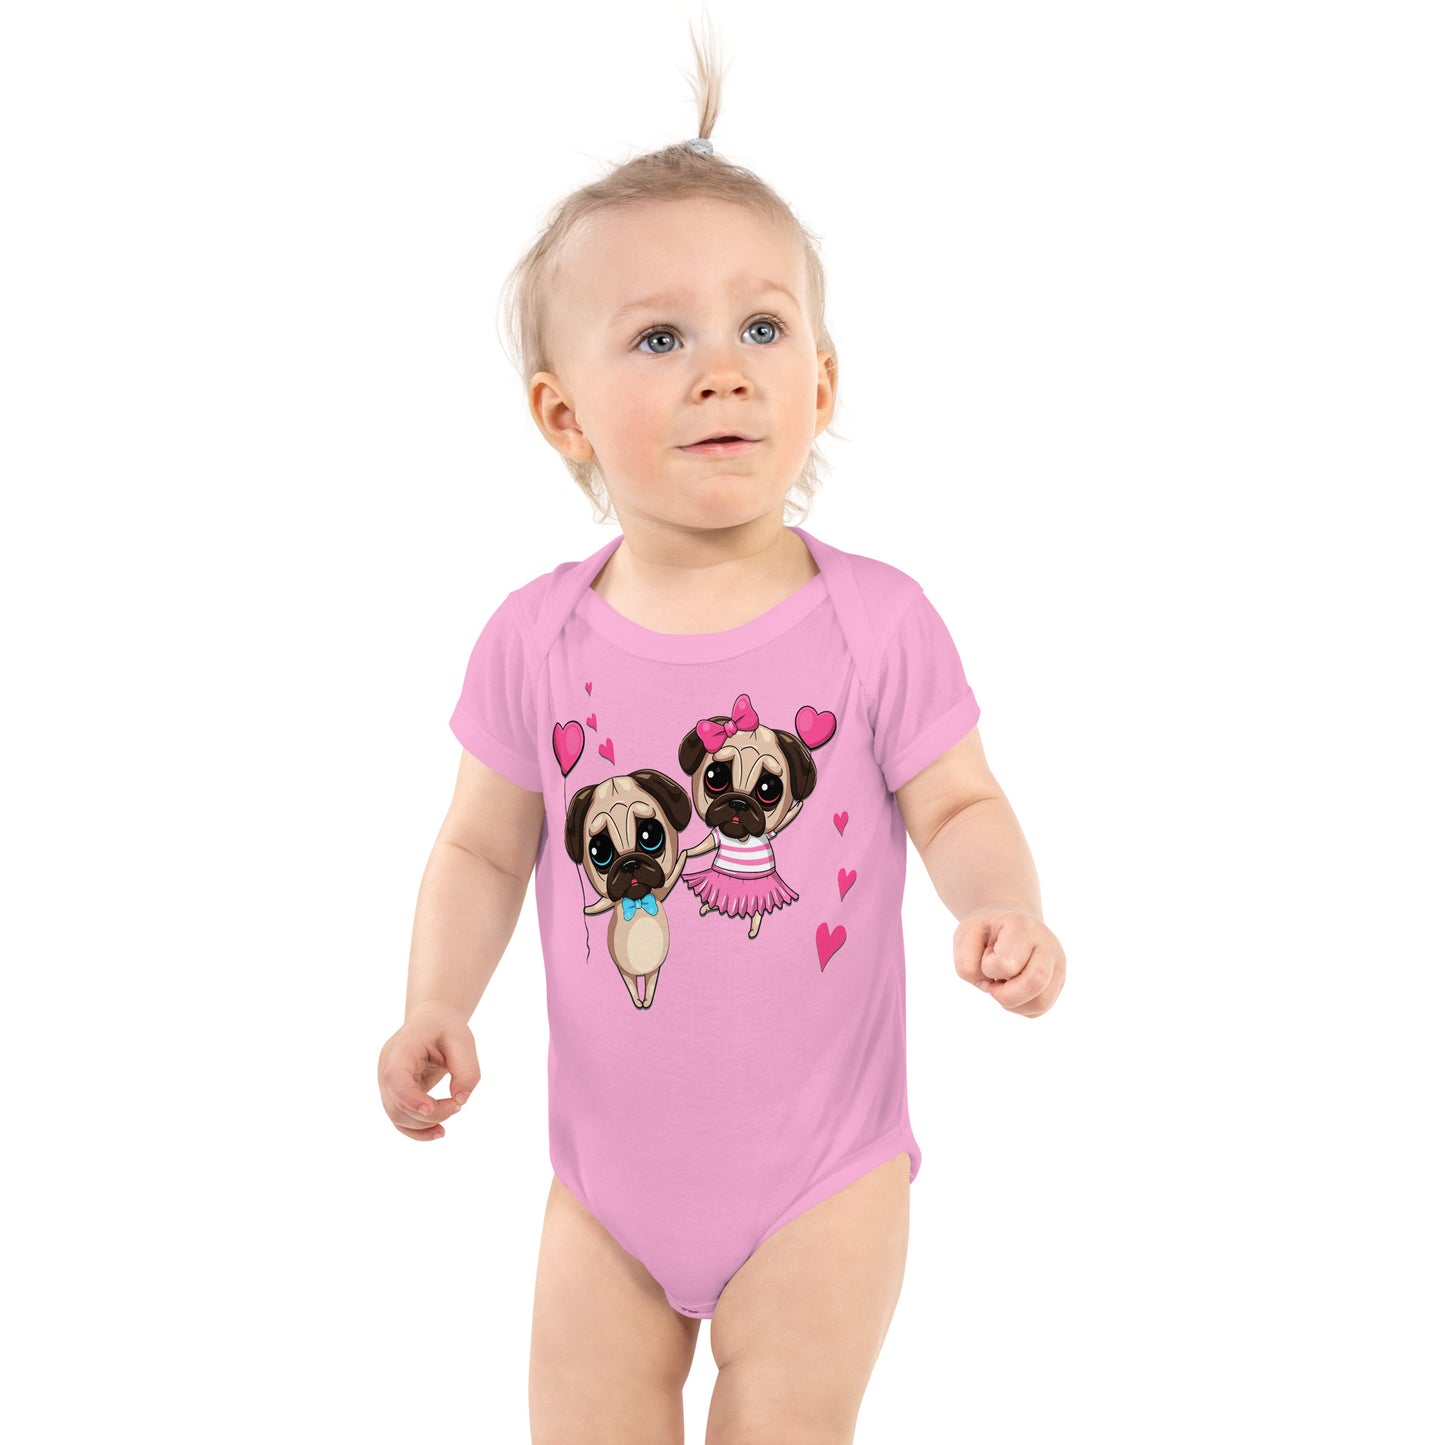 Couple Pug Dogs in Love Bodysuit, No. 0262